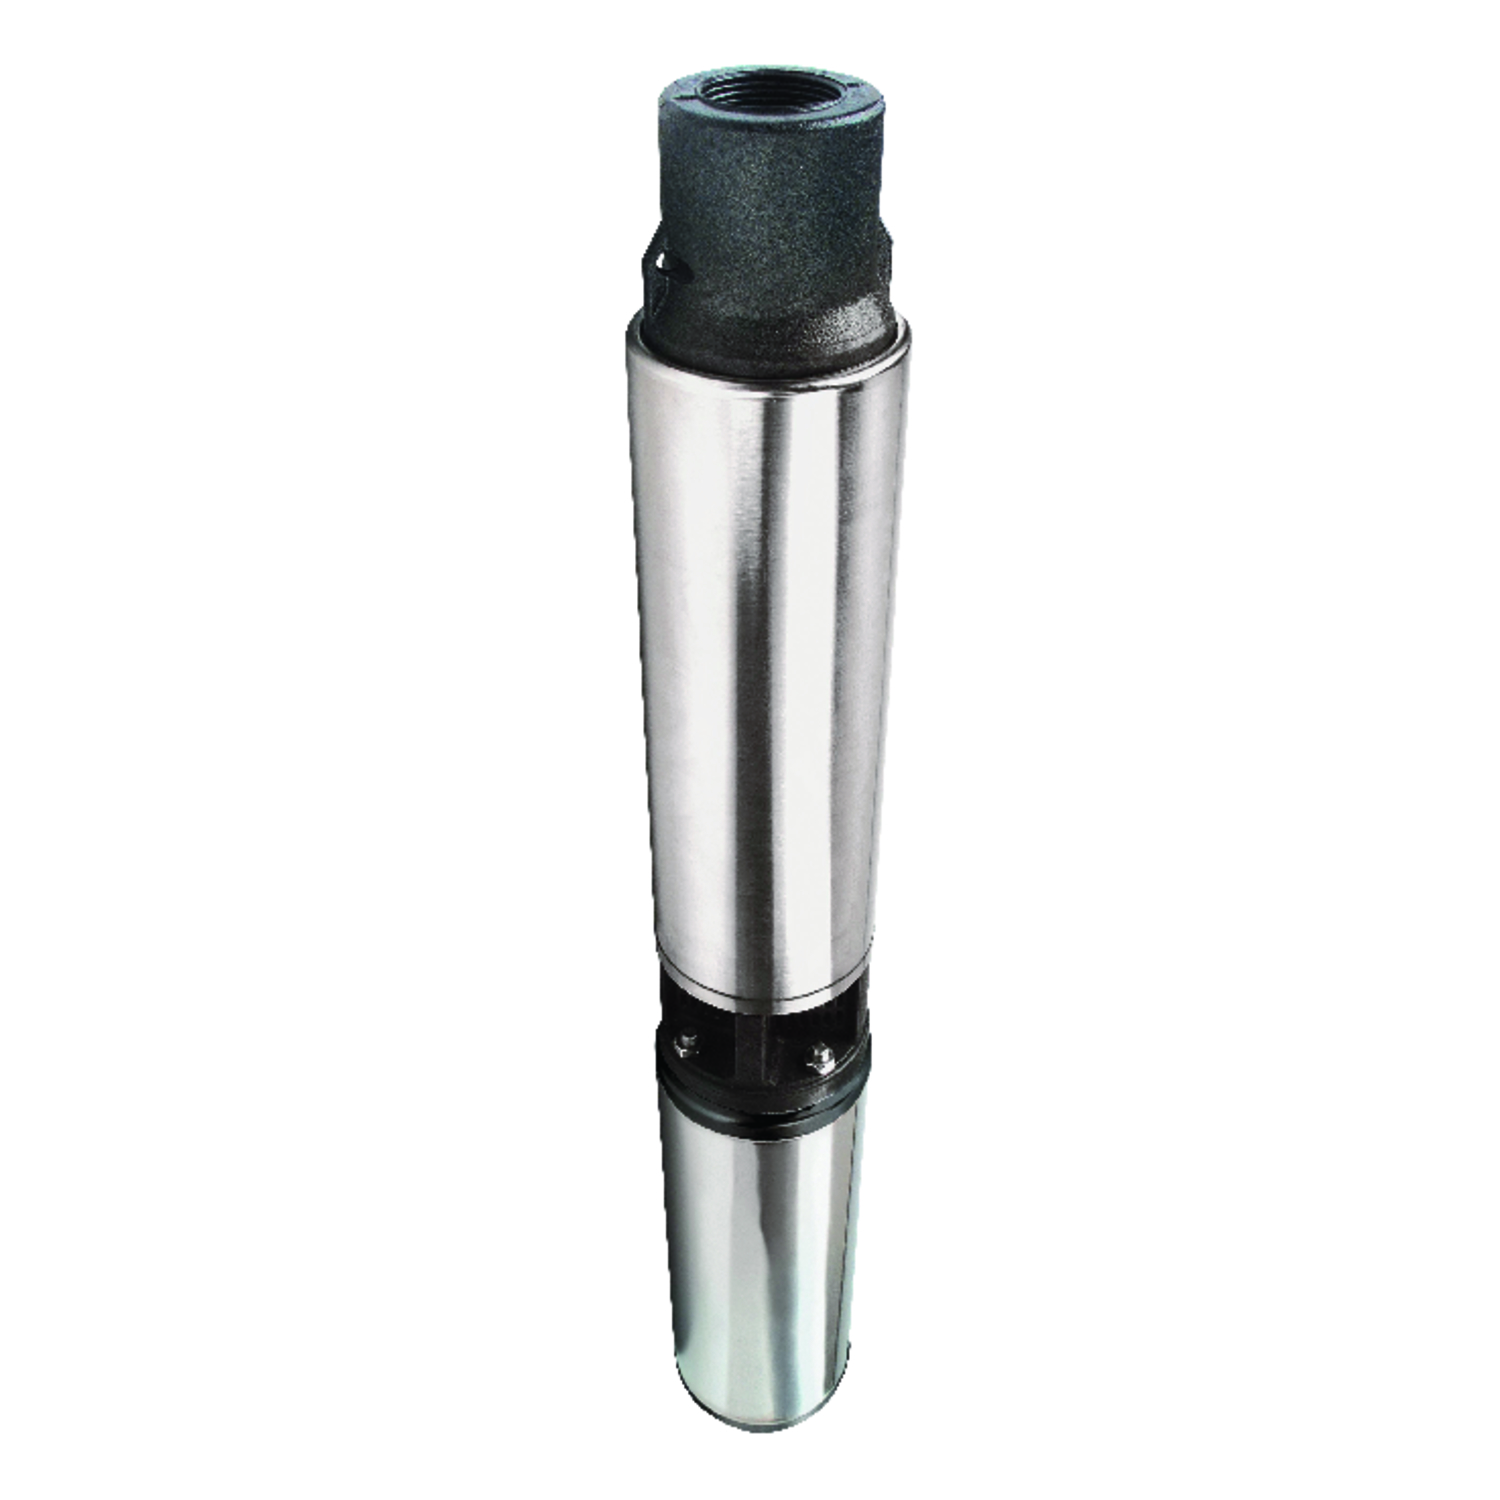 Ace 1-1/2 HP 3 wire 600 gph Stainless Steel Submersible Well Pump -  ACE1-1/2 3W